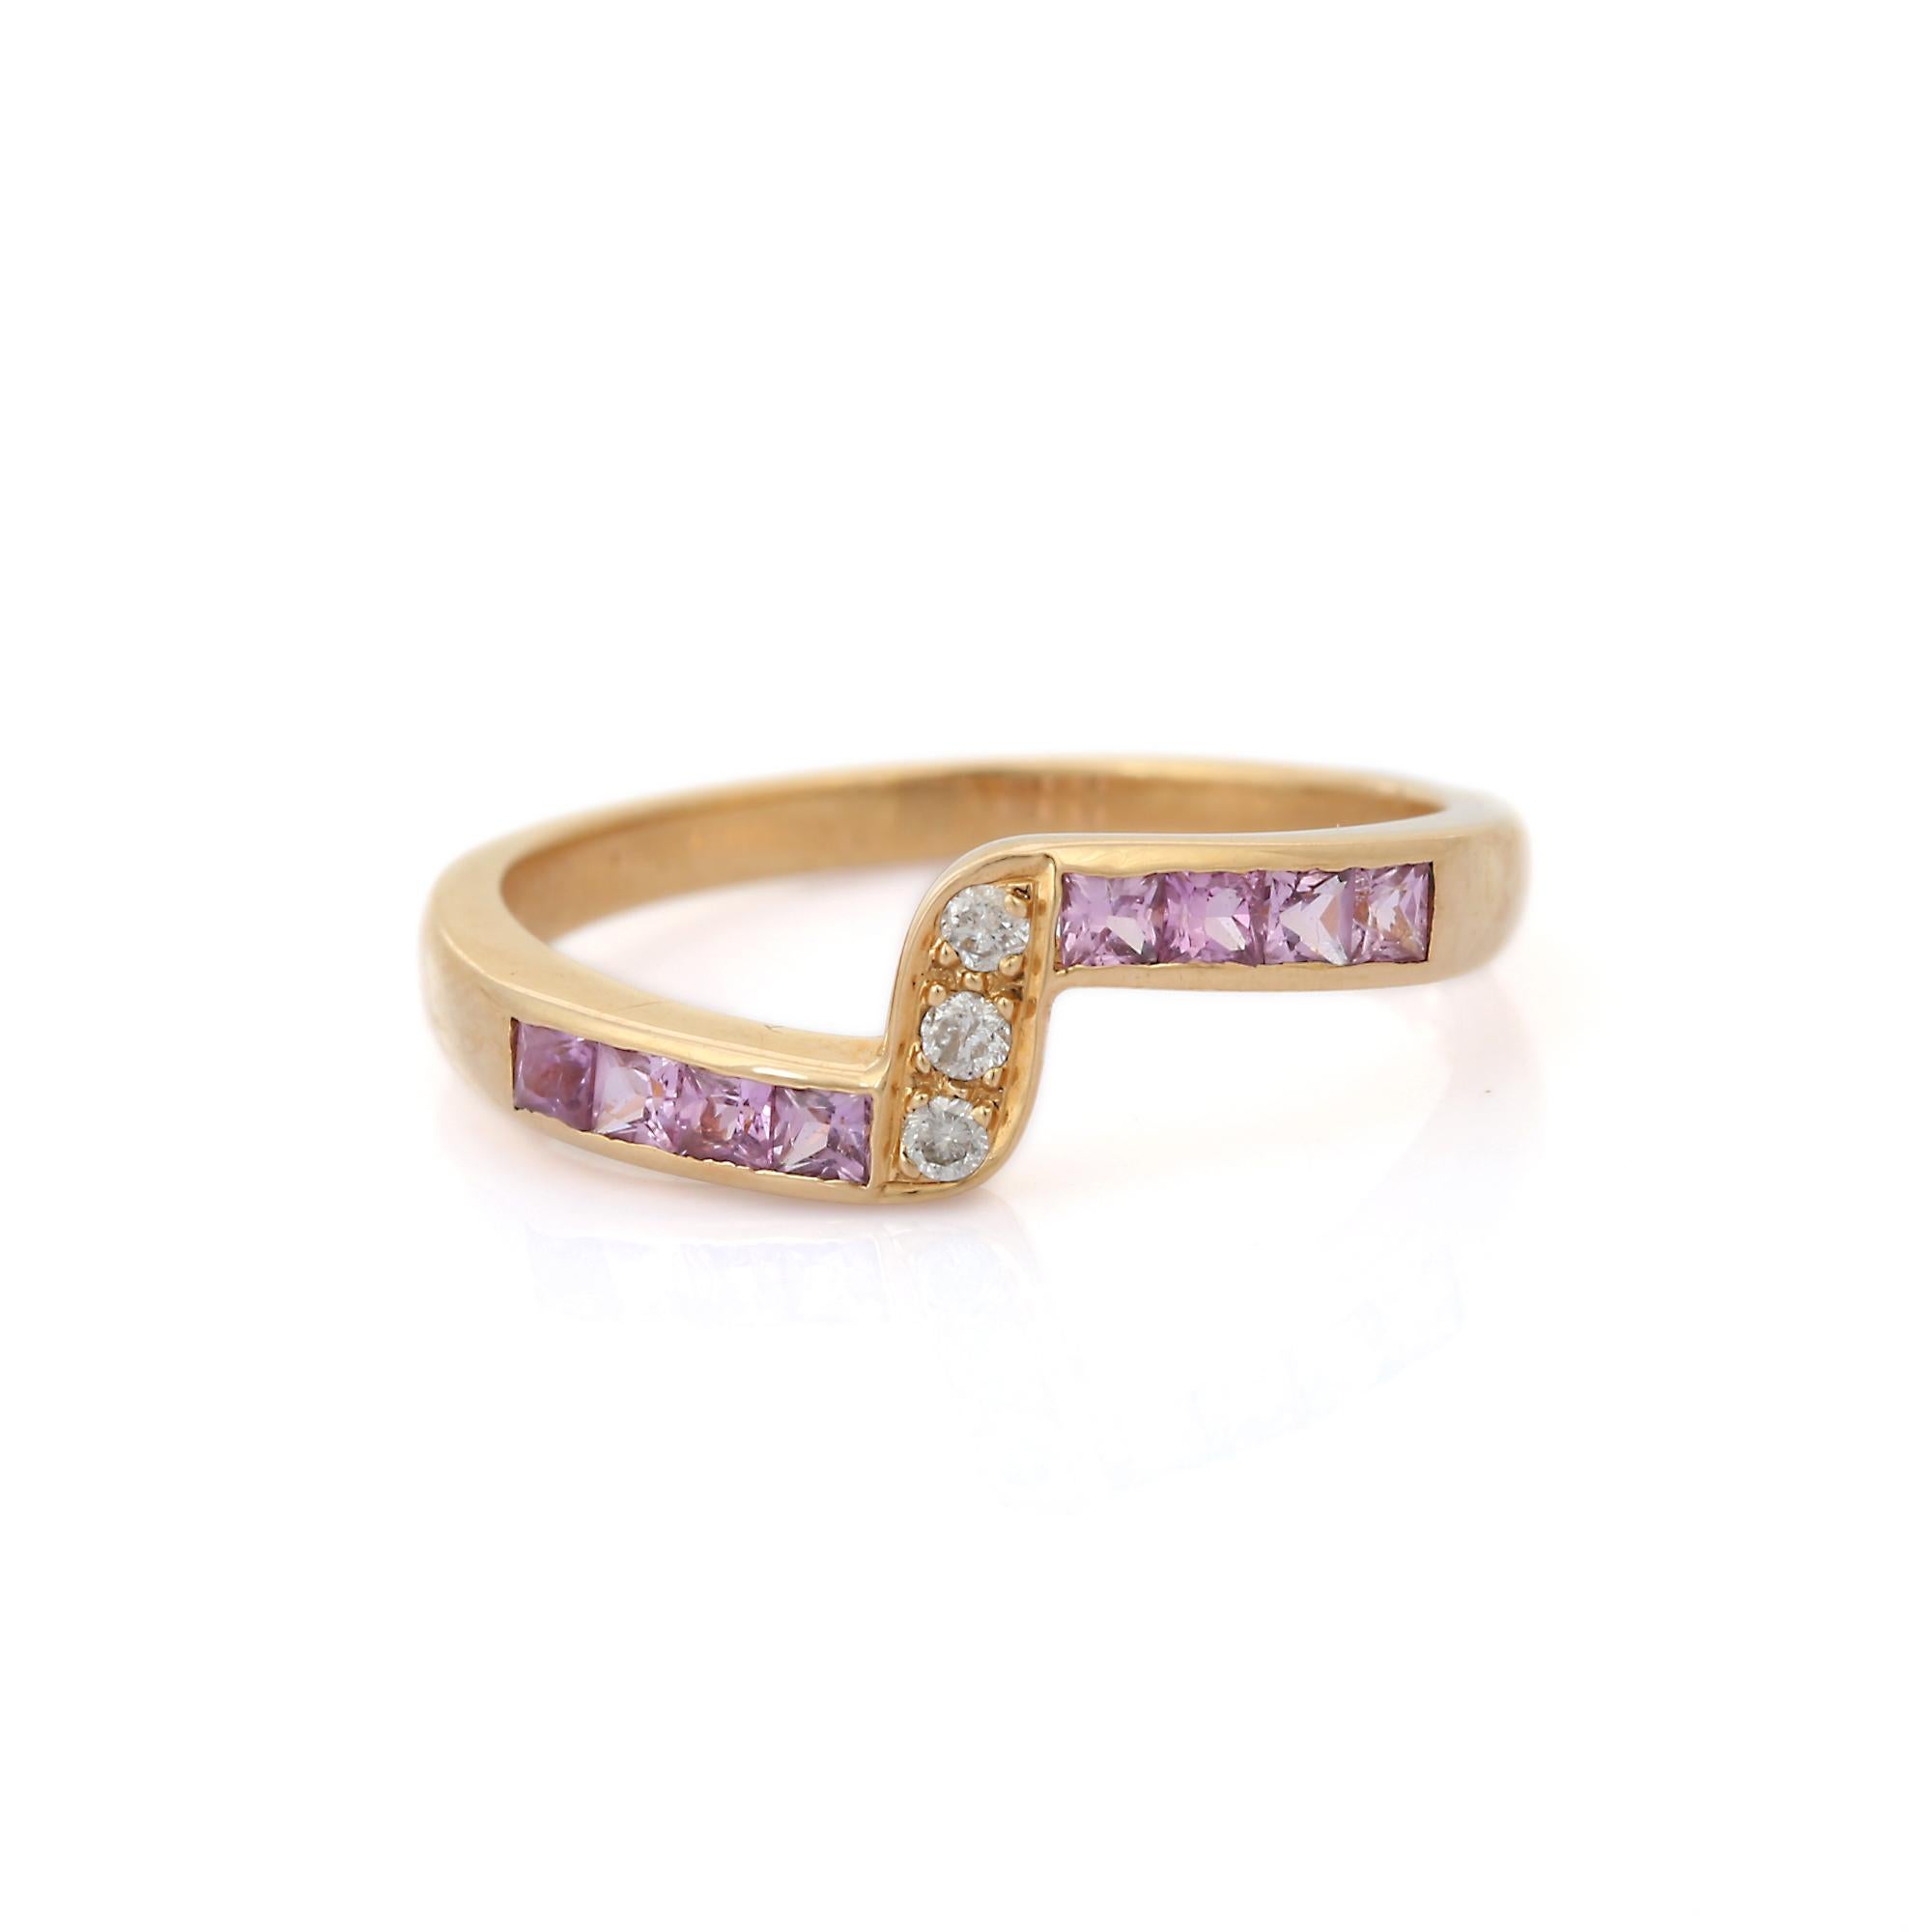 For Sale:  Genuine Diamond and Pink Sapphire Stackable Ring in 14K Yellow Gold 5